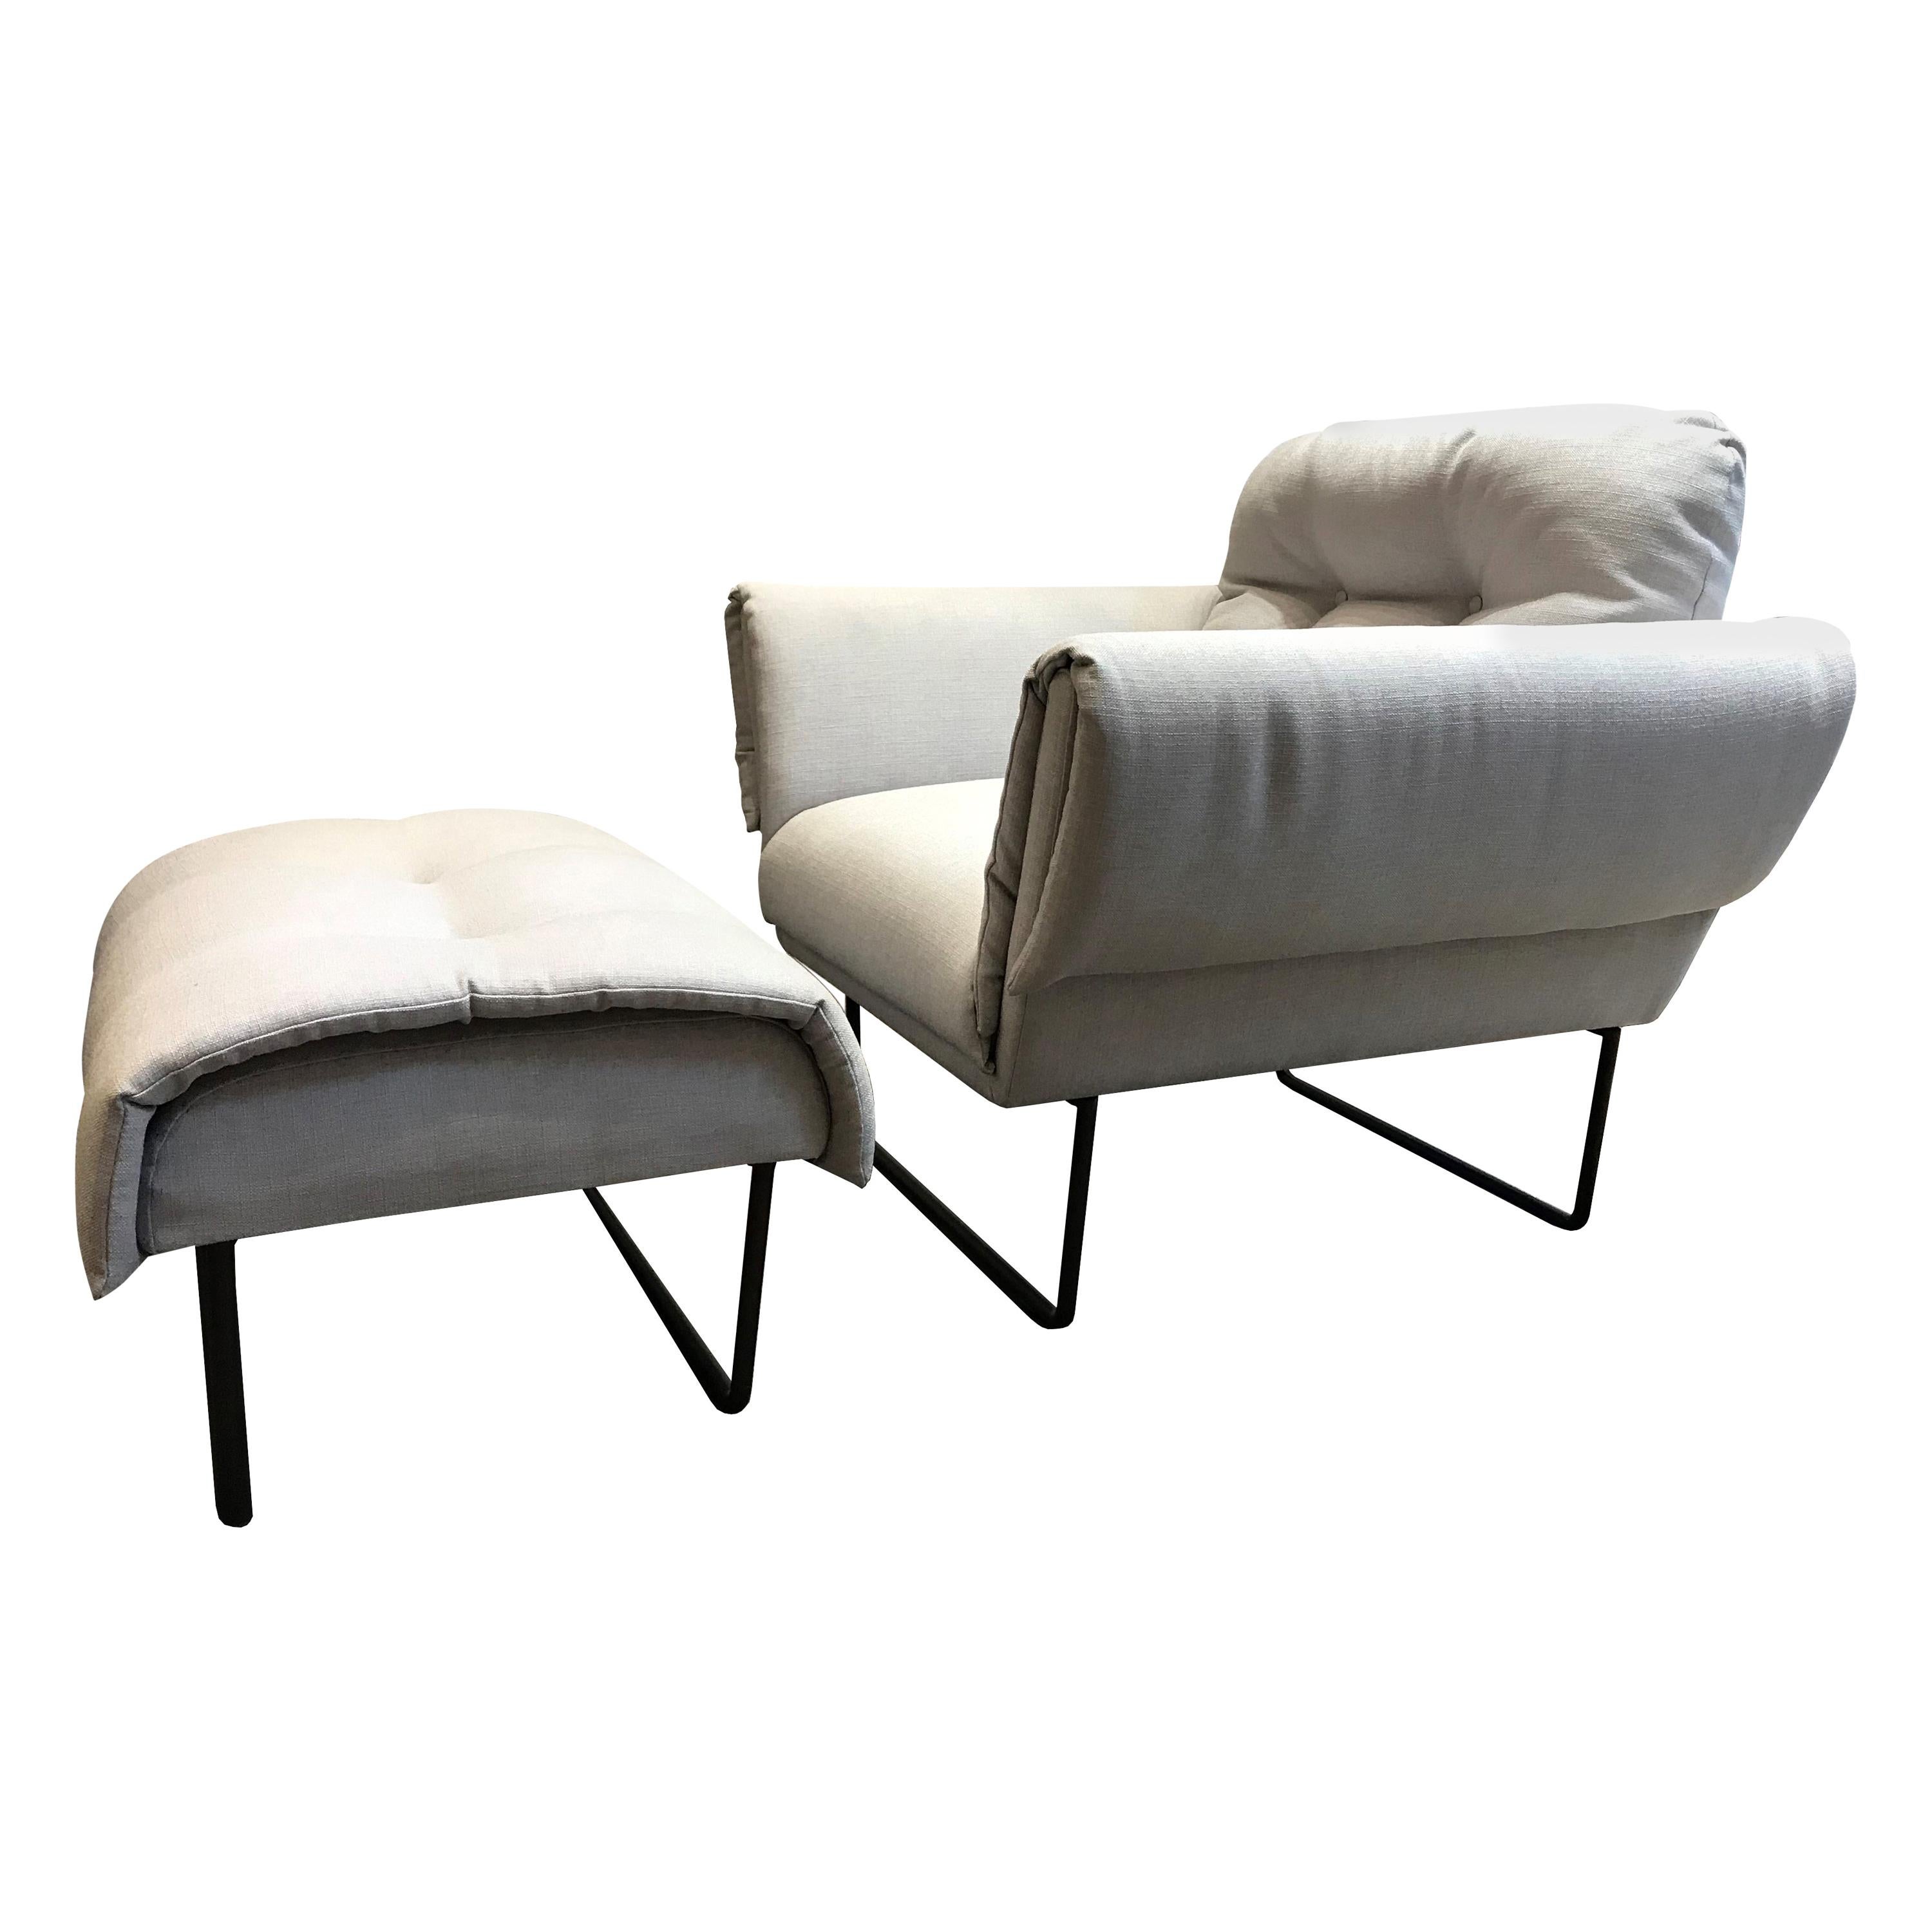 "Ro" Modernist Armchair with Ottoman in Upholstery and Painted Steel